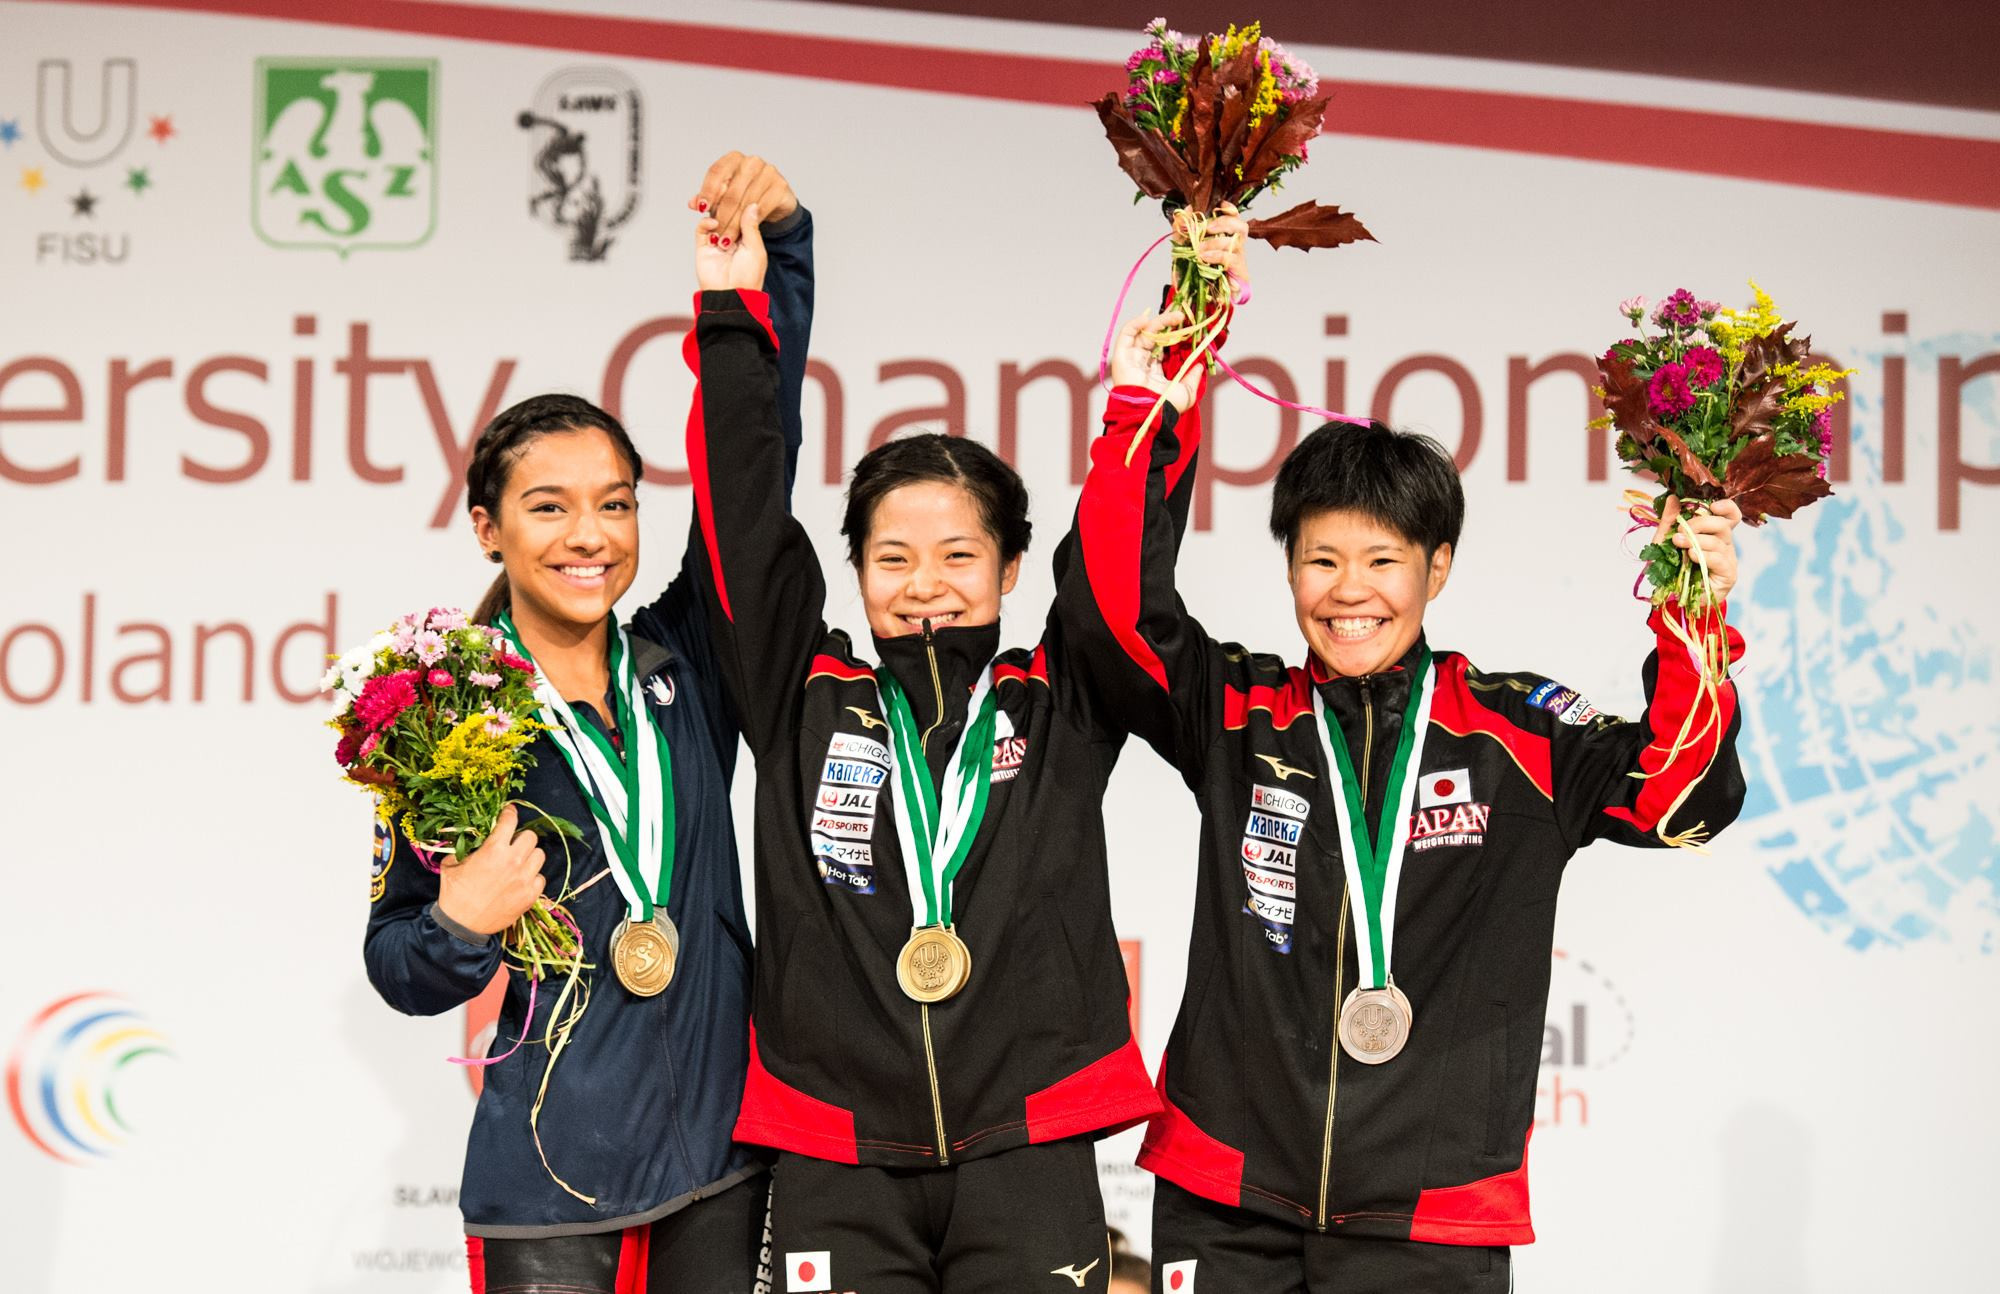 In the women's 48kg FISU World University Weightlifting Championships, Rira Suzuki of Japan ranked first, American Veronica Restrepo came second with and Iramina Rie of Japan came third. ©World University Weightlifting Championships

